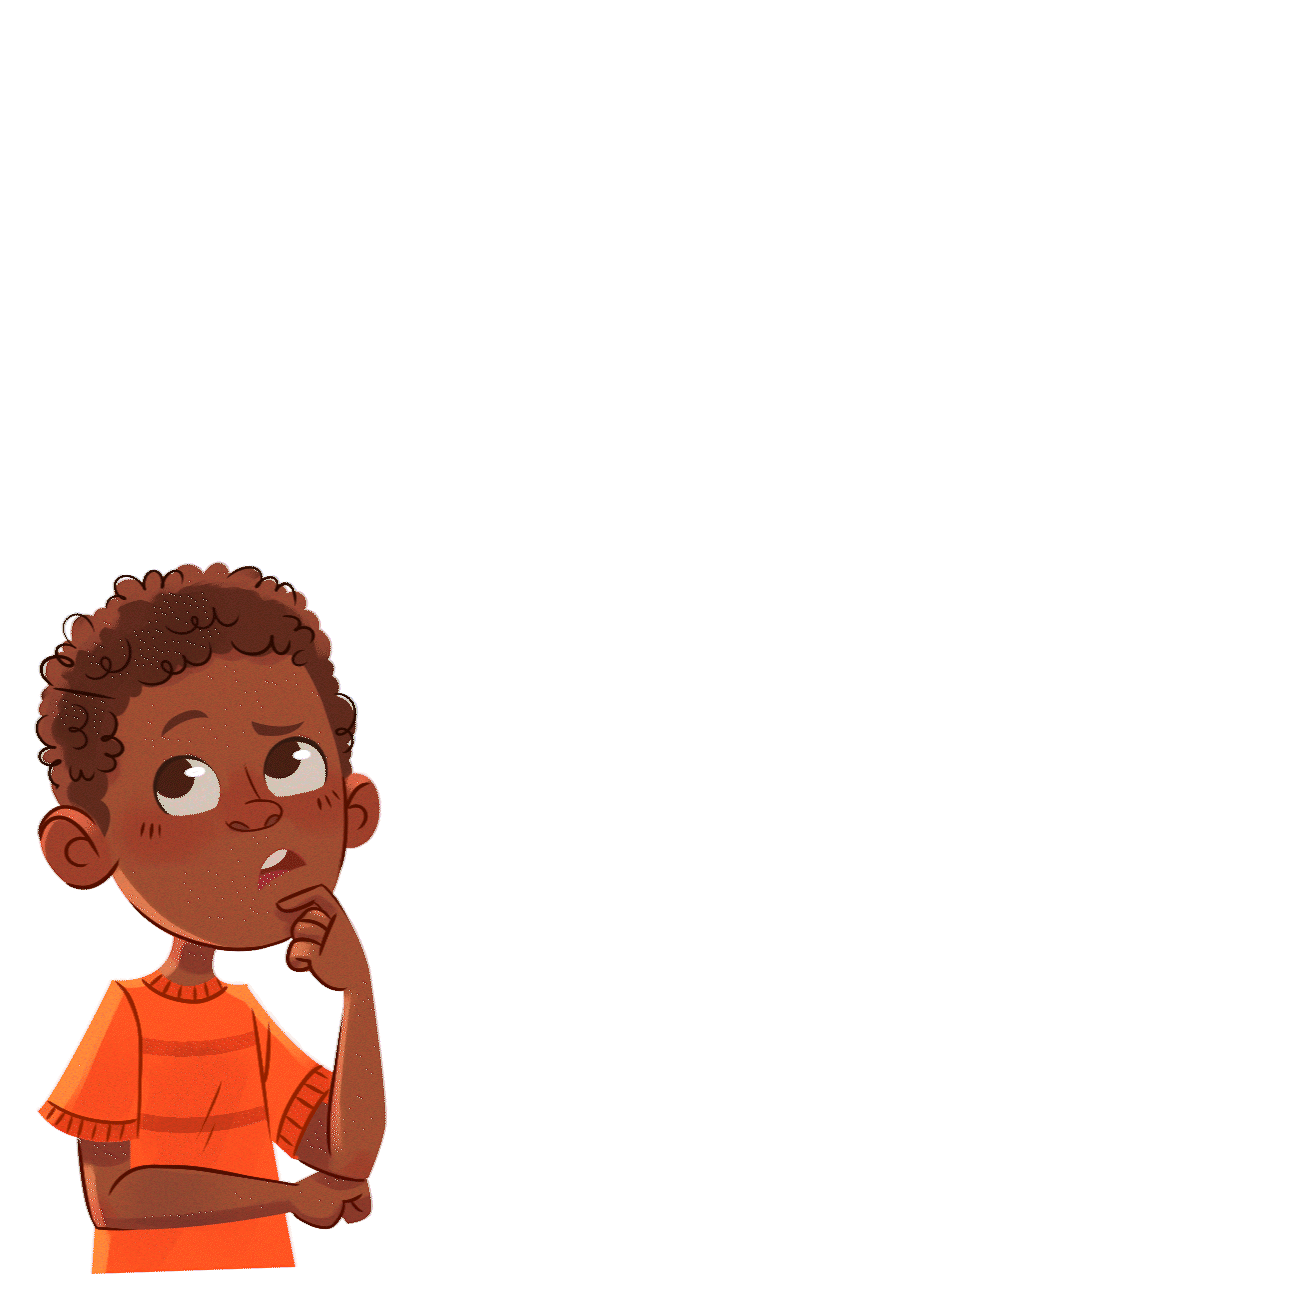 A colorful cartoon portrait of a kid with dark skin and an orange shirt, looking pensive as a though bubble appears above his head.